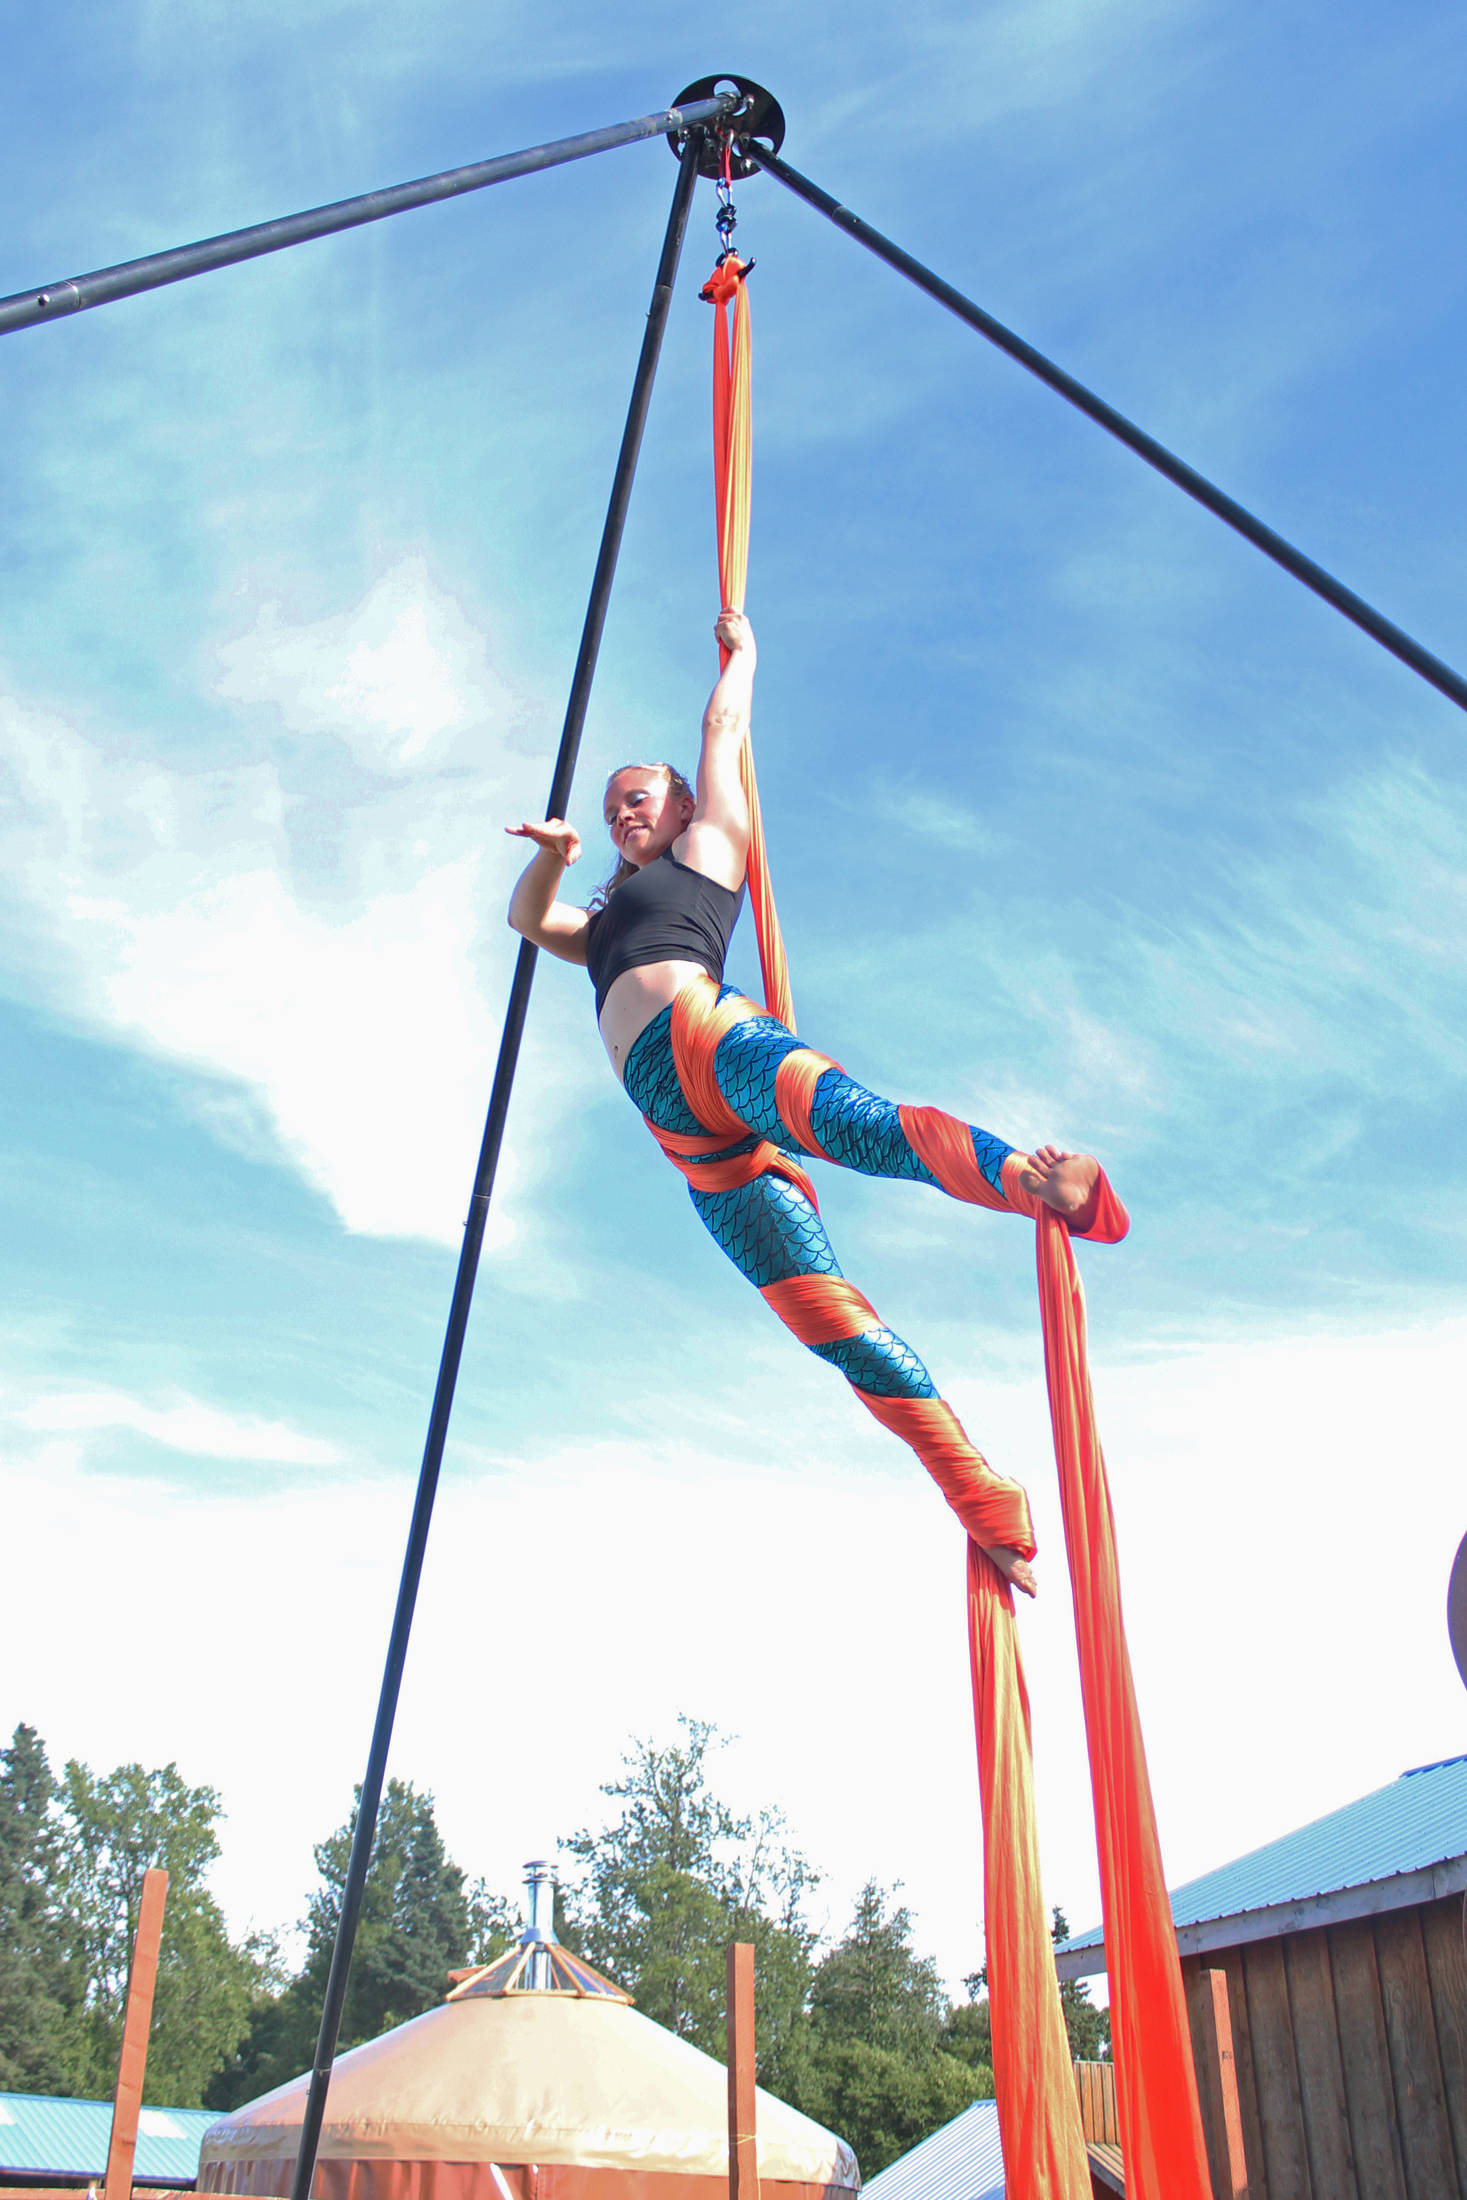 An aerial performer spins in the air next to the Ocean State at this year’s Salmonfest on Saturday, Aug. 4, 2018 at the Kenai Peninsula Fairgrounds in Ninilchik, Alaska. (Photo by Megan Pacer/Homer News)